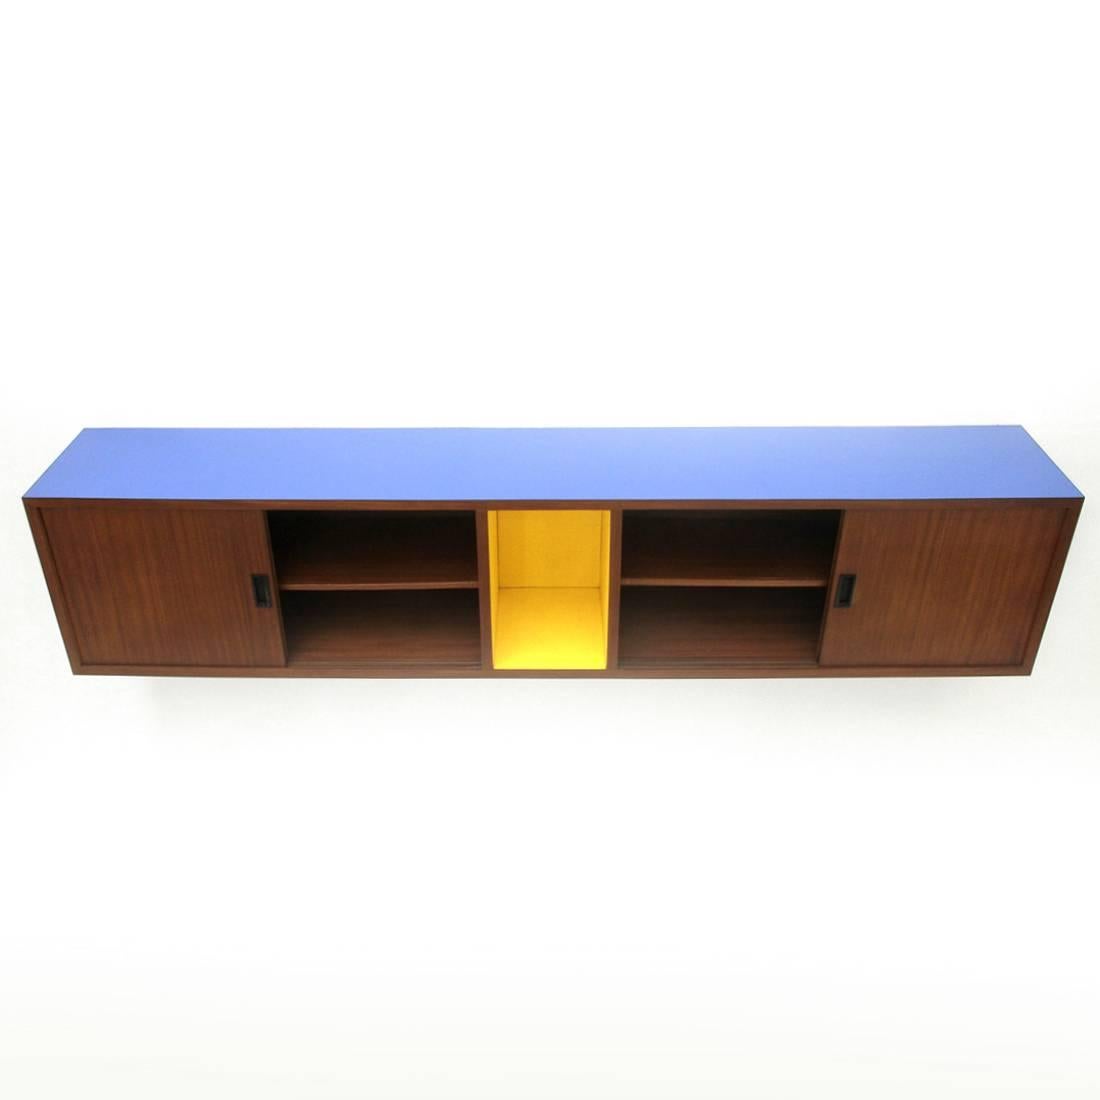 Mid-20th Century Italian Midcentury Teak and Colored Formica Sideboard, 1960s